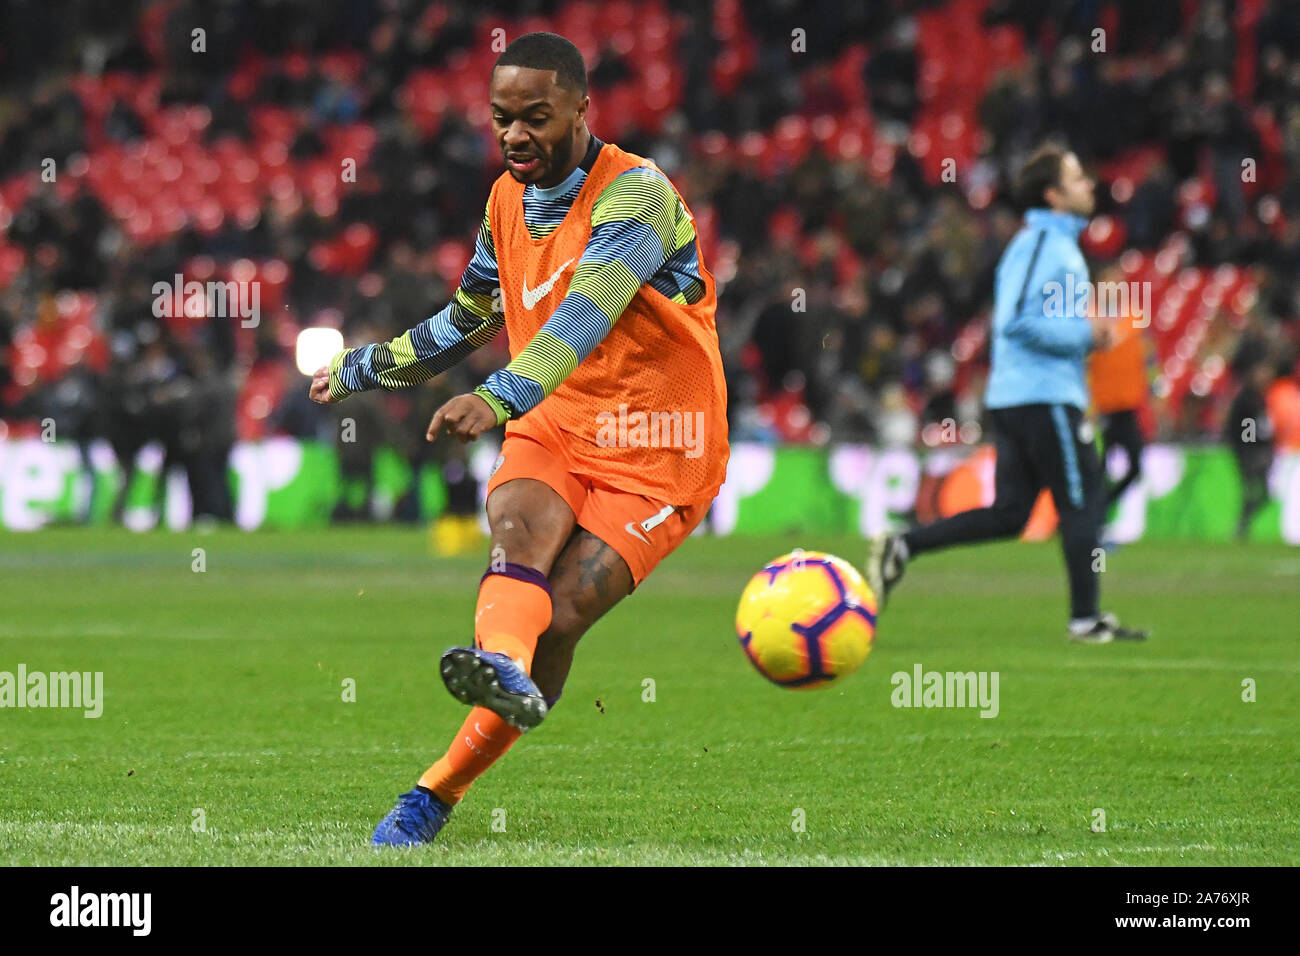 LONDON, ENGLAND - OCTOBER 29, 2018: Raheem Sterling of City pictured prior to the 2018/19 English Premier League game between Tottenham Hotspur and Manchester City at Wembley Stadium. Stock Photo